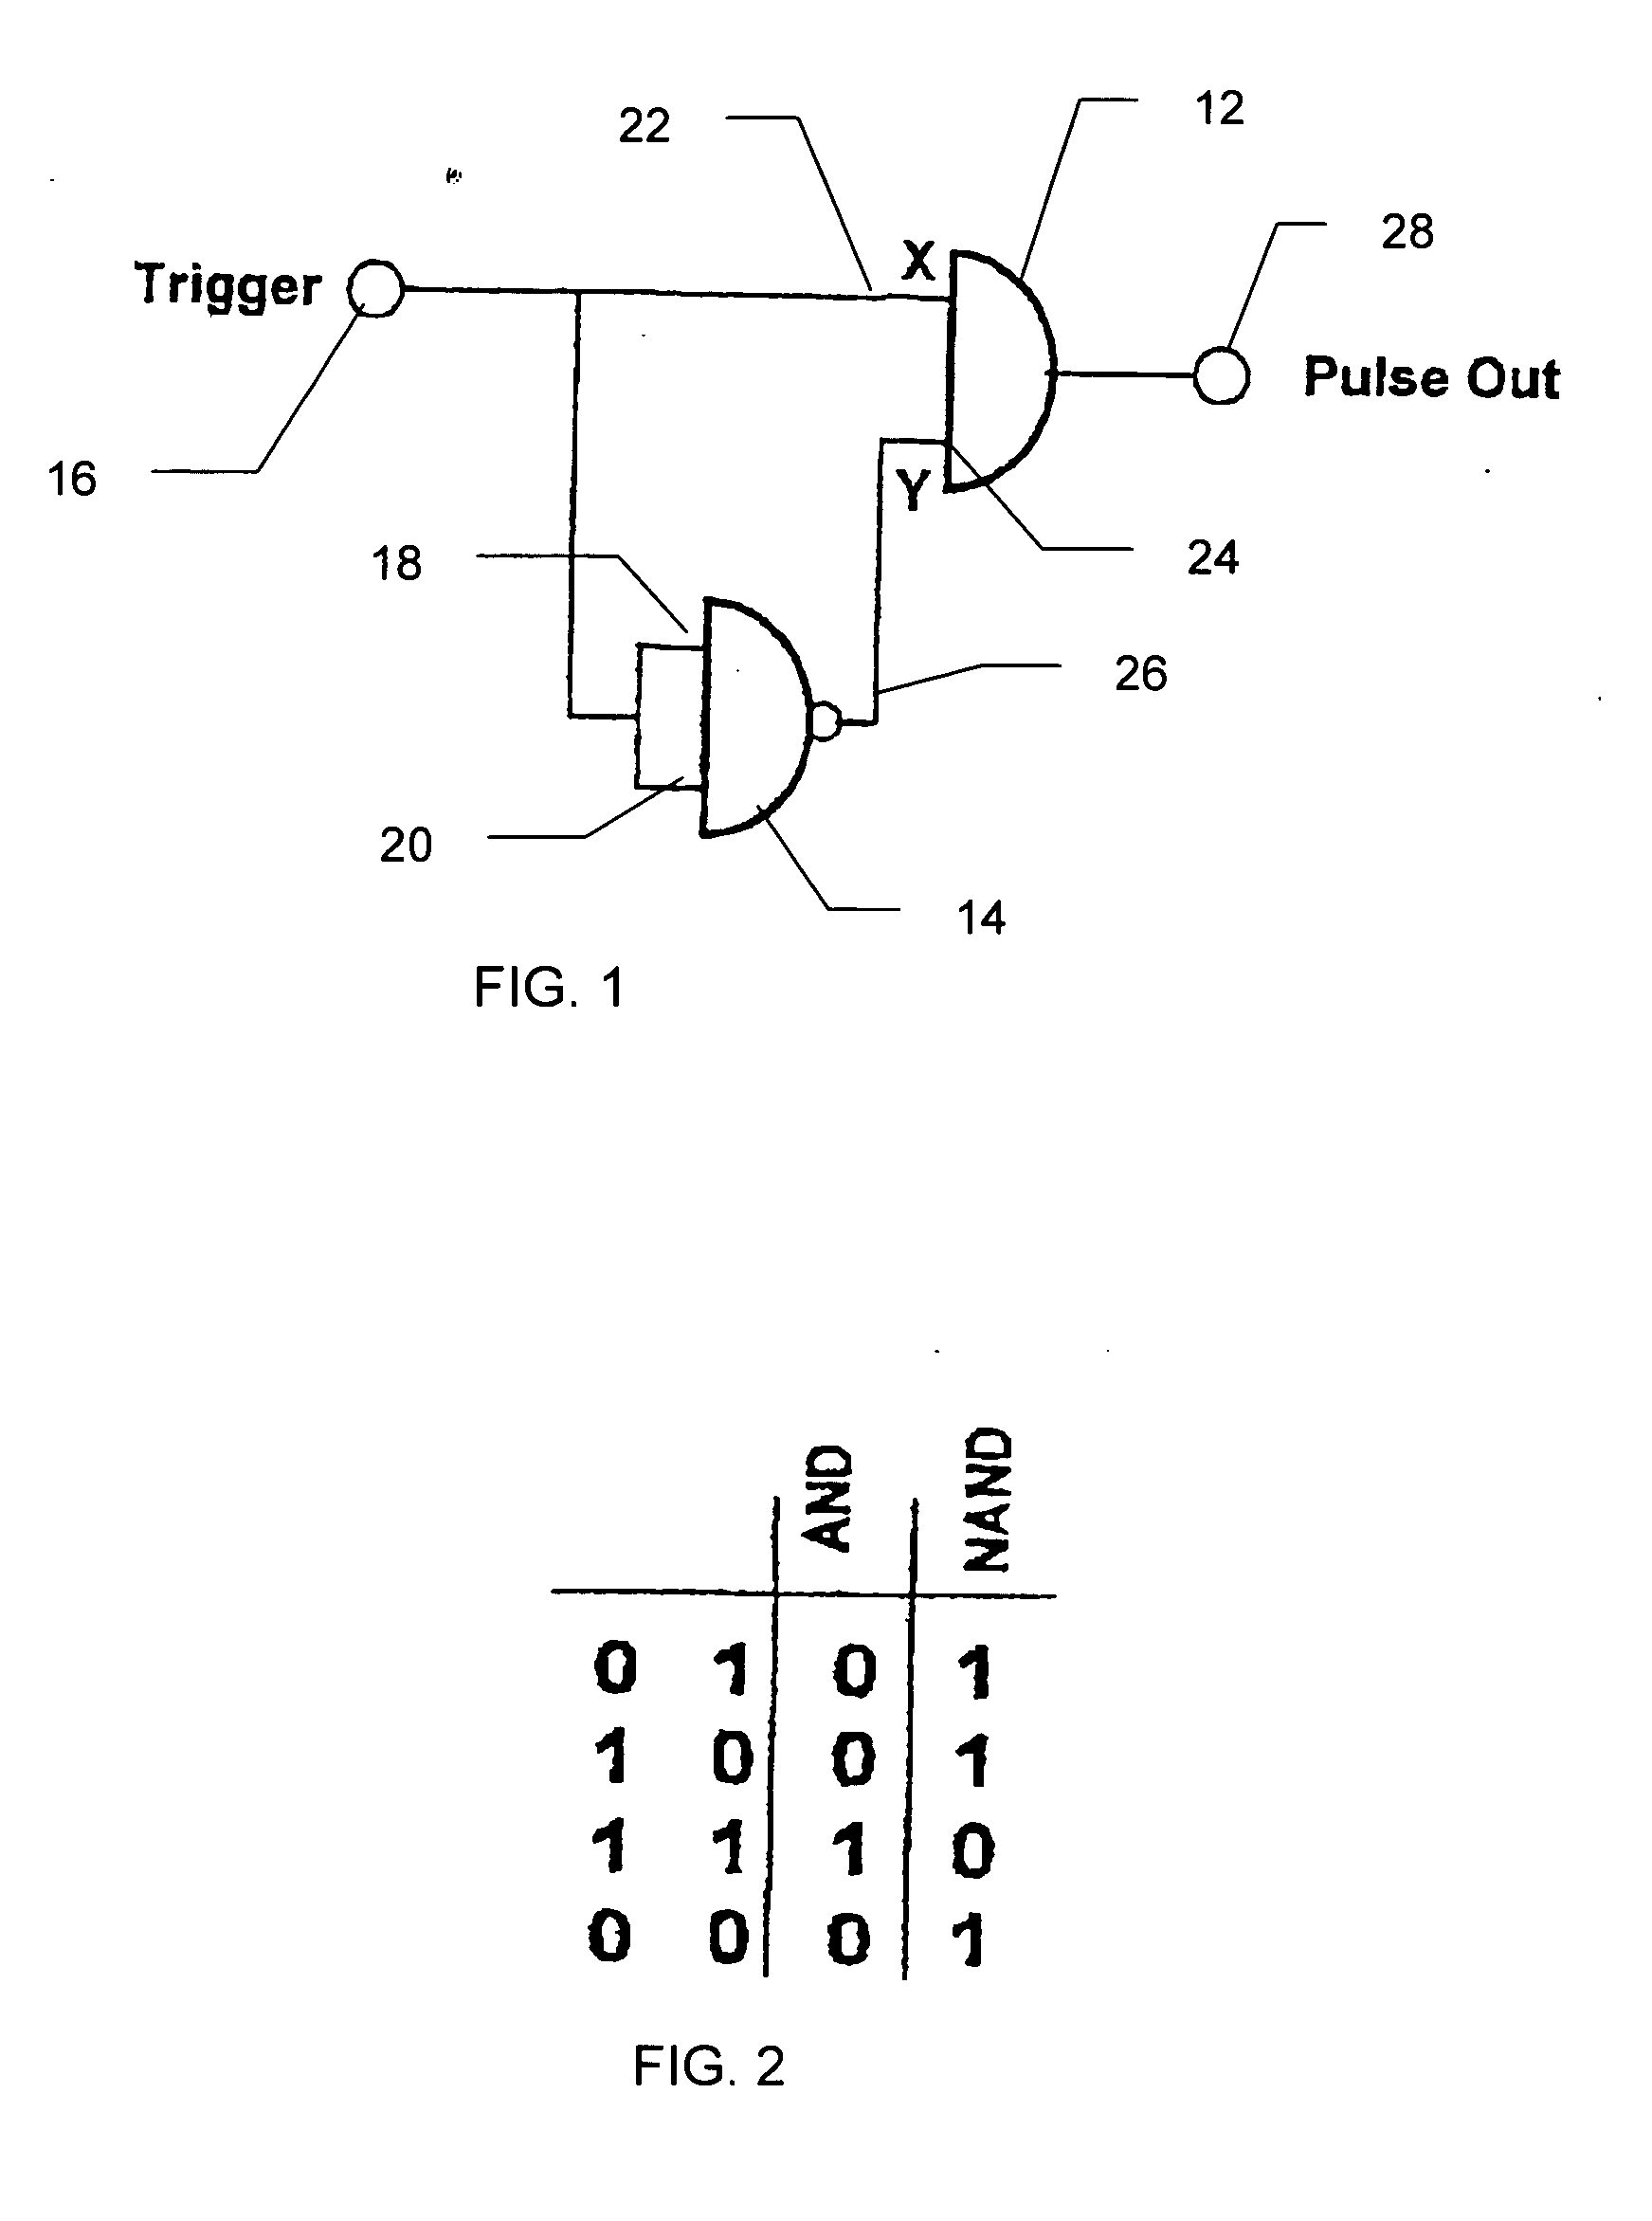 Generating a fine time offset using a SiGe pulse generator